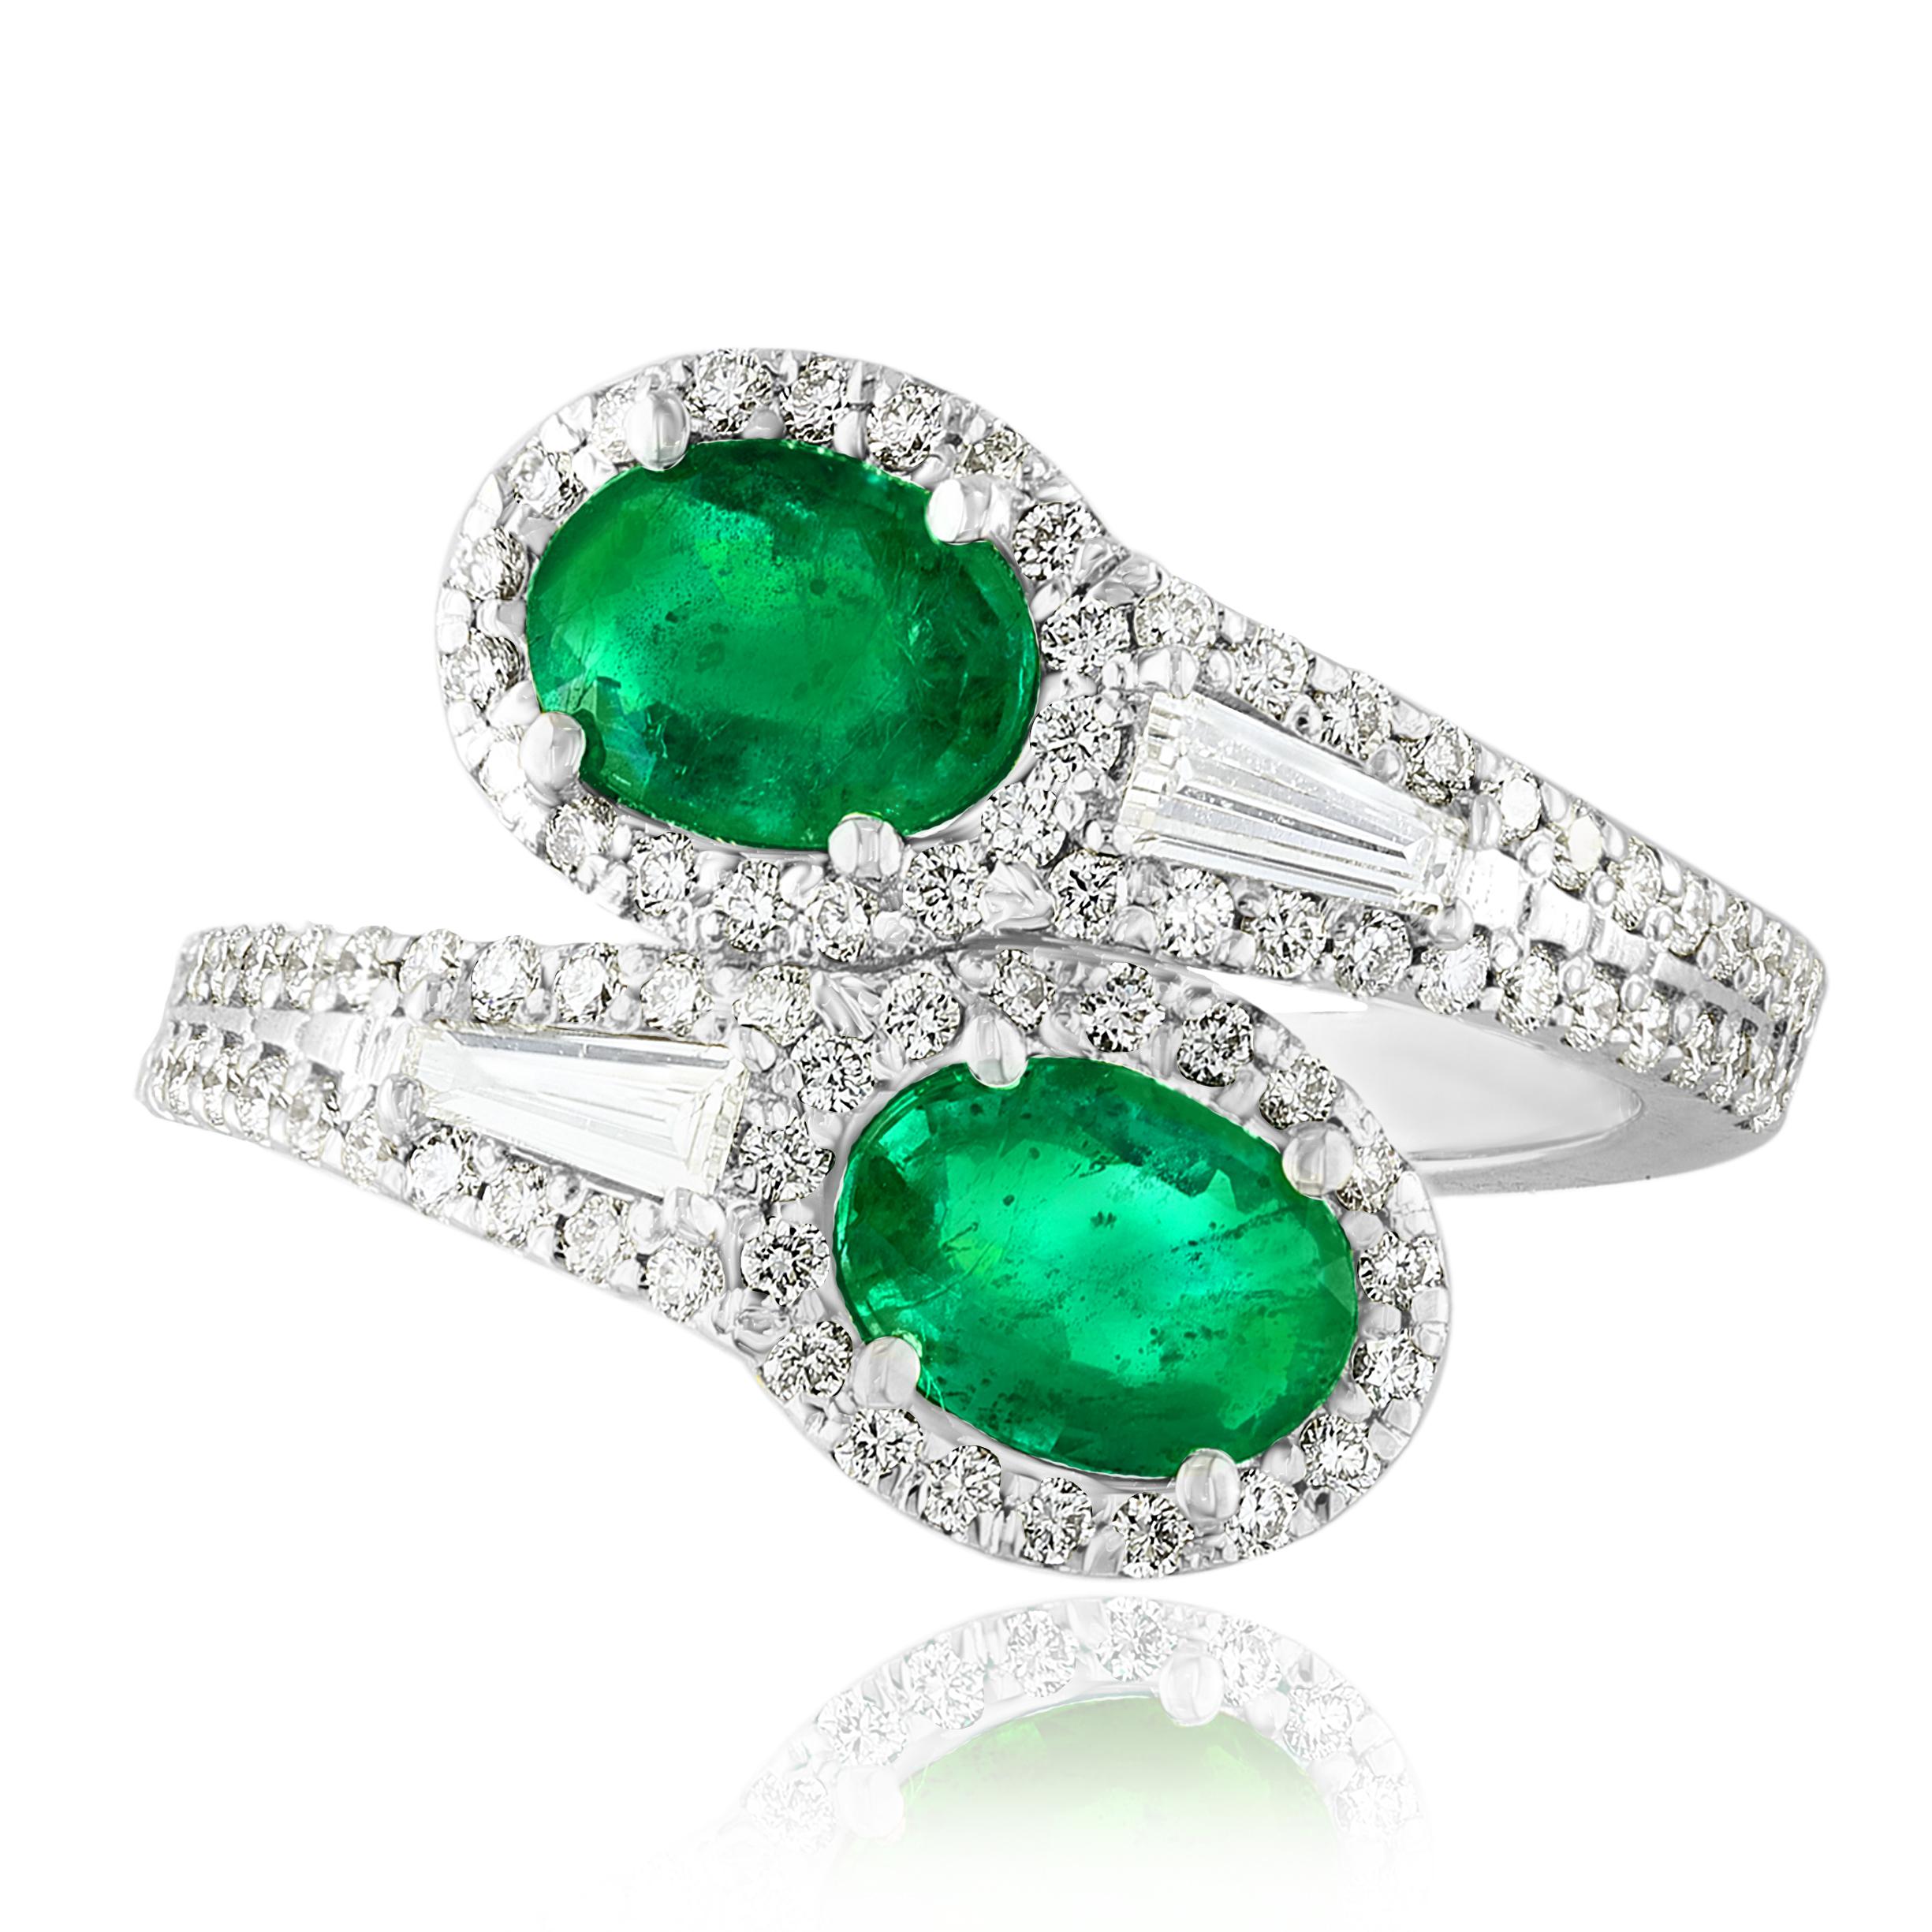 The stunning forever-together Toi et Moi ring features 2 Oval cut Emeralds embraced by east to west 2 baguette diamonds weigh and 84 round diamonds halfway to the shank. Handcrafted in 14k White Gold.
2 oval Emeralds in the center weigh 1.52 carats